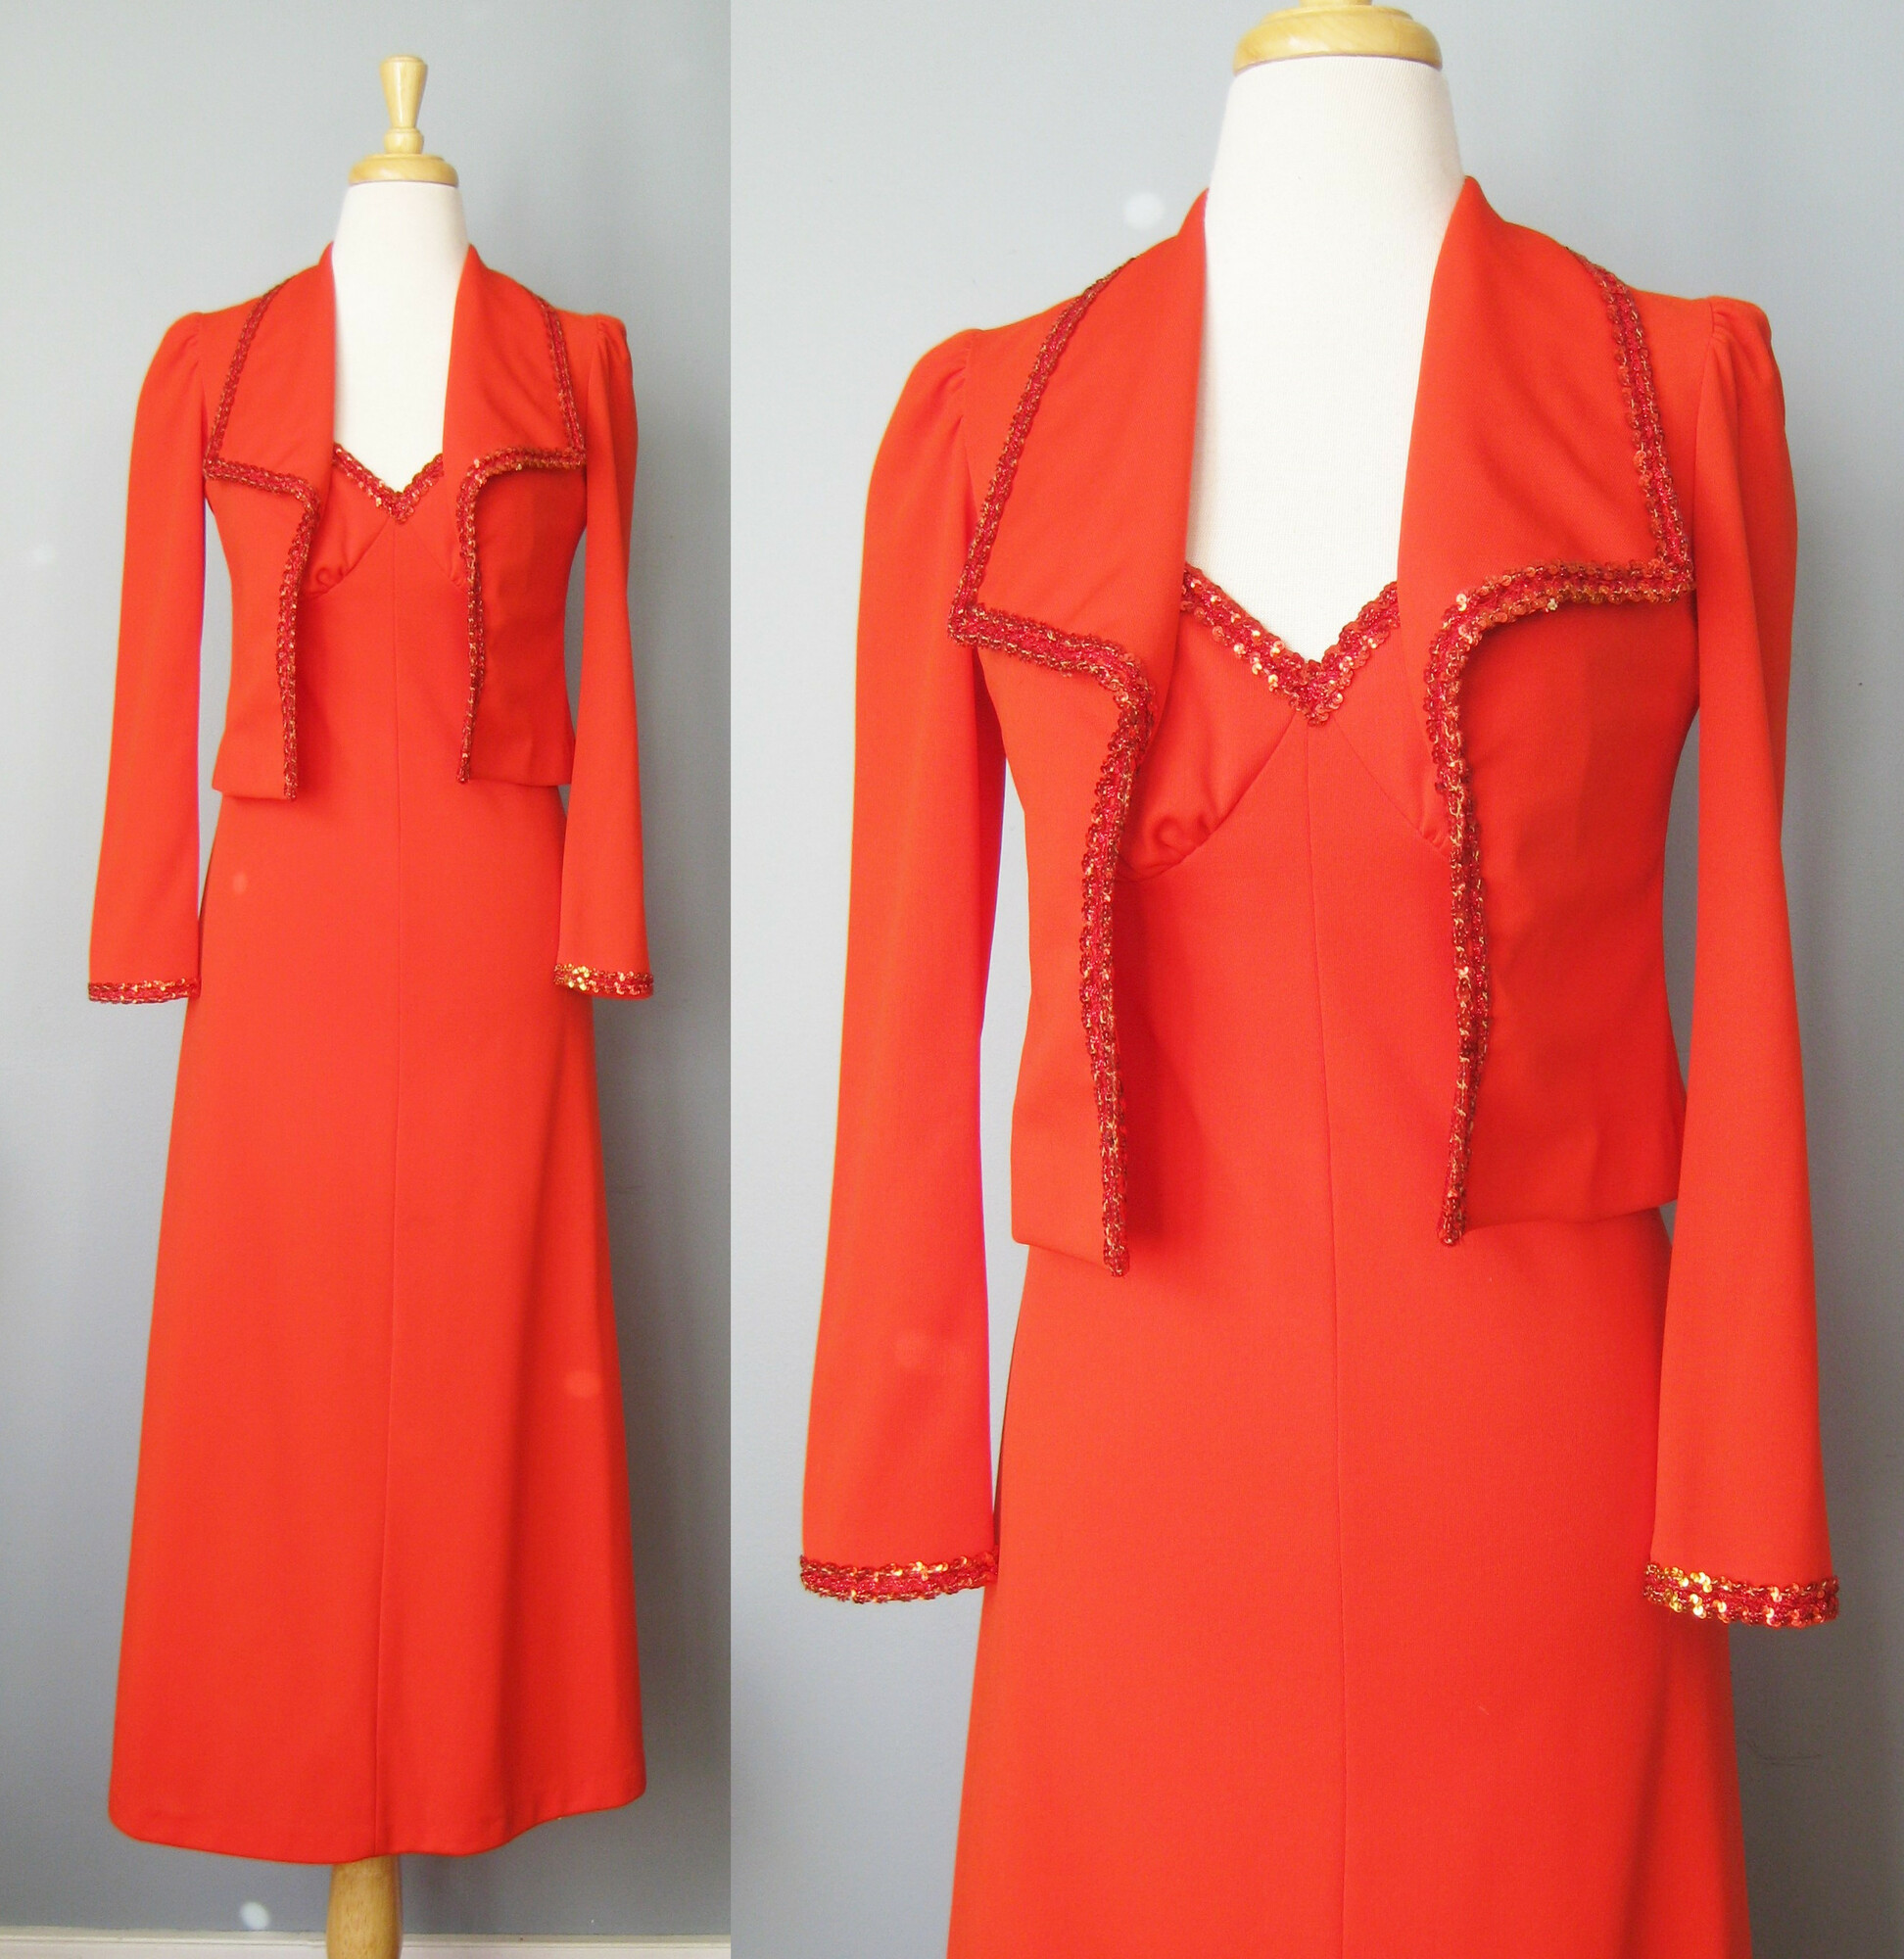 Bright Red prom dress from the 1970s.
This outfit consists of a spaghetti strap gown with a fitted top trimmed in sequins
The jacket is waist length, long sleeved and has the same trim

The size tag says size 7 but WILL NOT fit a modern size 7.  My mannequin is about a size 4 and this dress will not zip all the way up on it so, figure this for a size 0 -2,  also better for a slim woman or girl who is buying junior sizes.

Here are the flat measurements, please double where appropriate:

DRESS:
Armpit to armpit: 17.5
Waist: 13.25
Hip: 19
Length: 52.5

JACKET:
Shoulder to shoulder: 13
Armpit to armpit: 16
Underarm sleeve seam length: 18.25
Length: 17
condition: excellent, there is a vanishingly faint shadow on the front of the dress and a darker smudge which is hidden by the turn of the collar of the jacket as shown., so it won't be seen when

Thanks for looking!
#38876